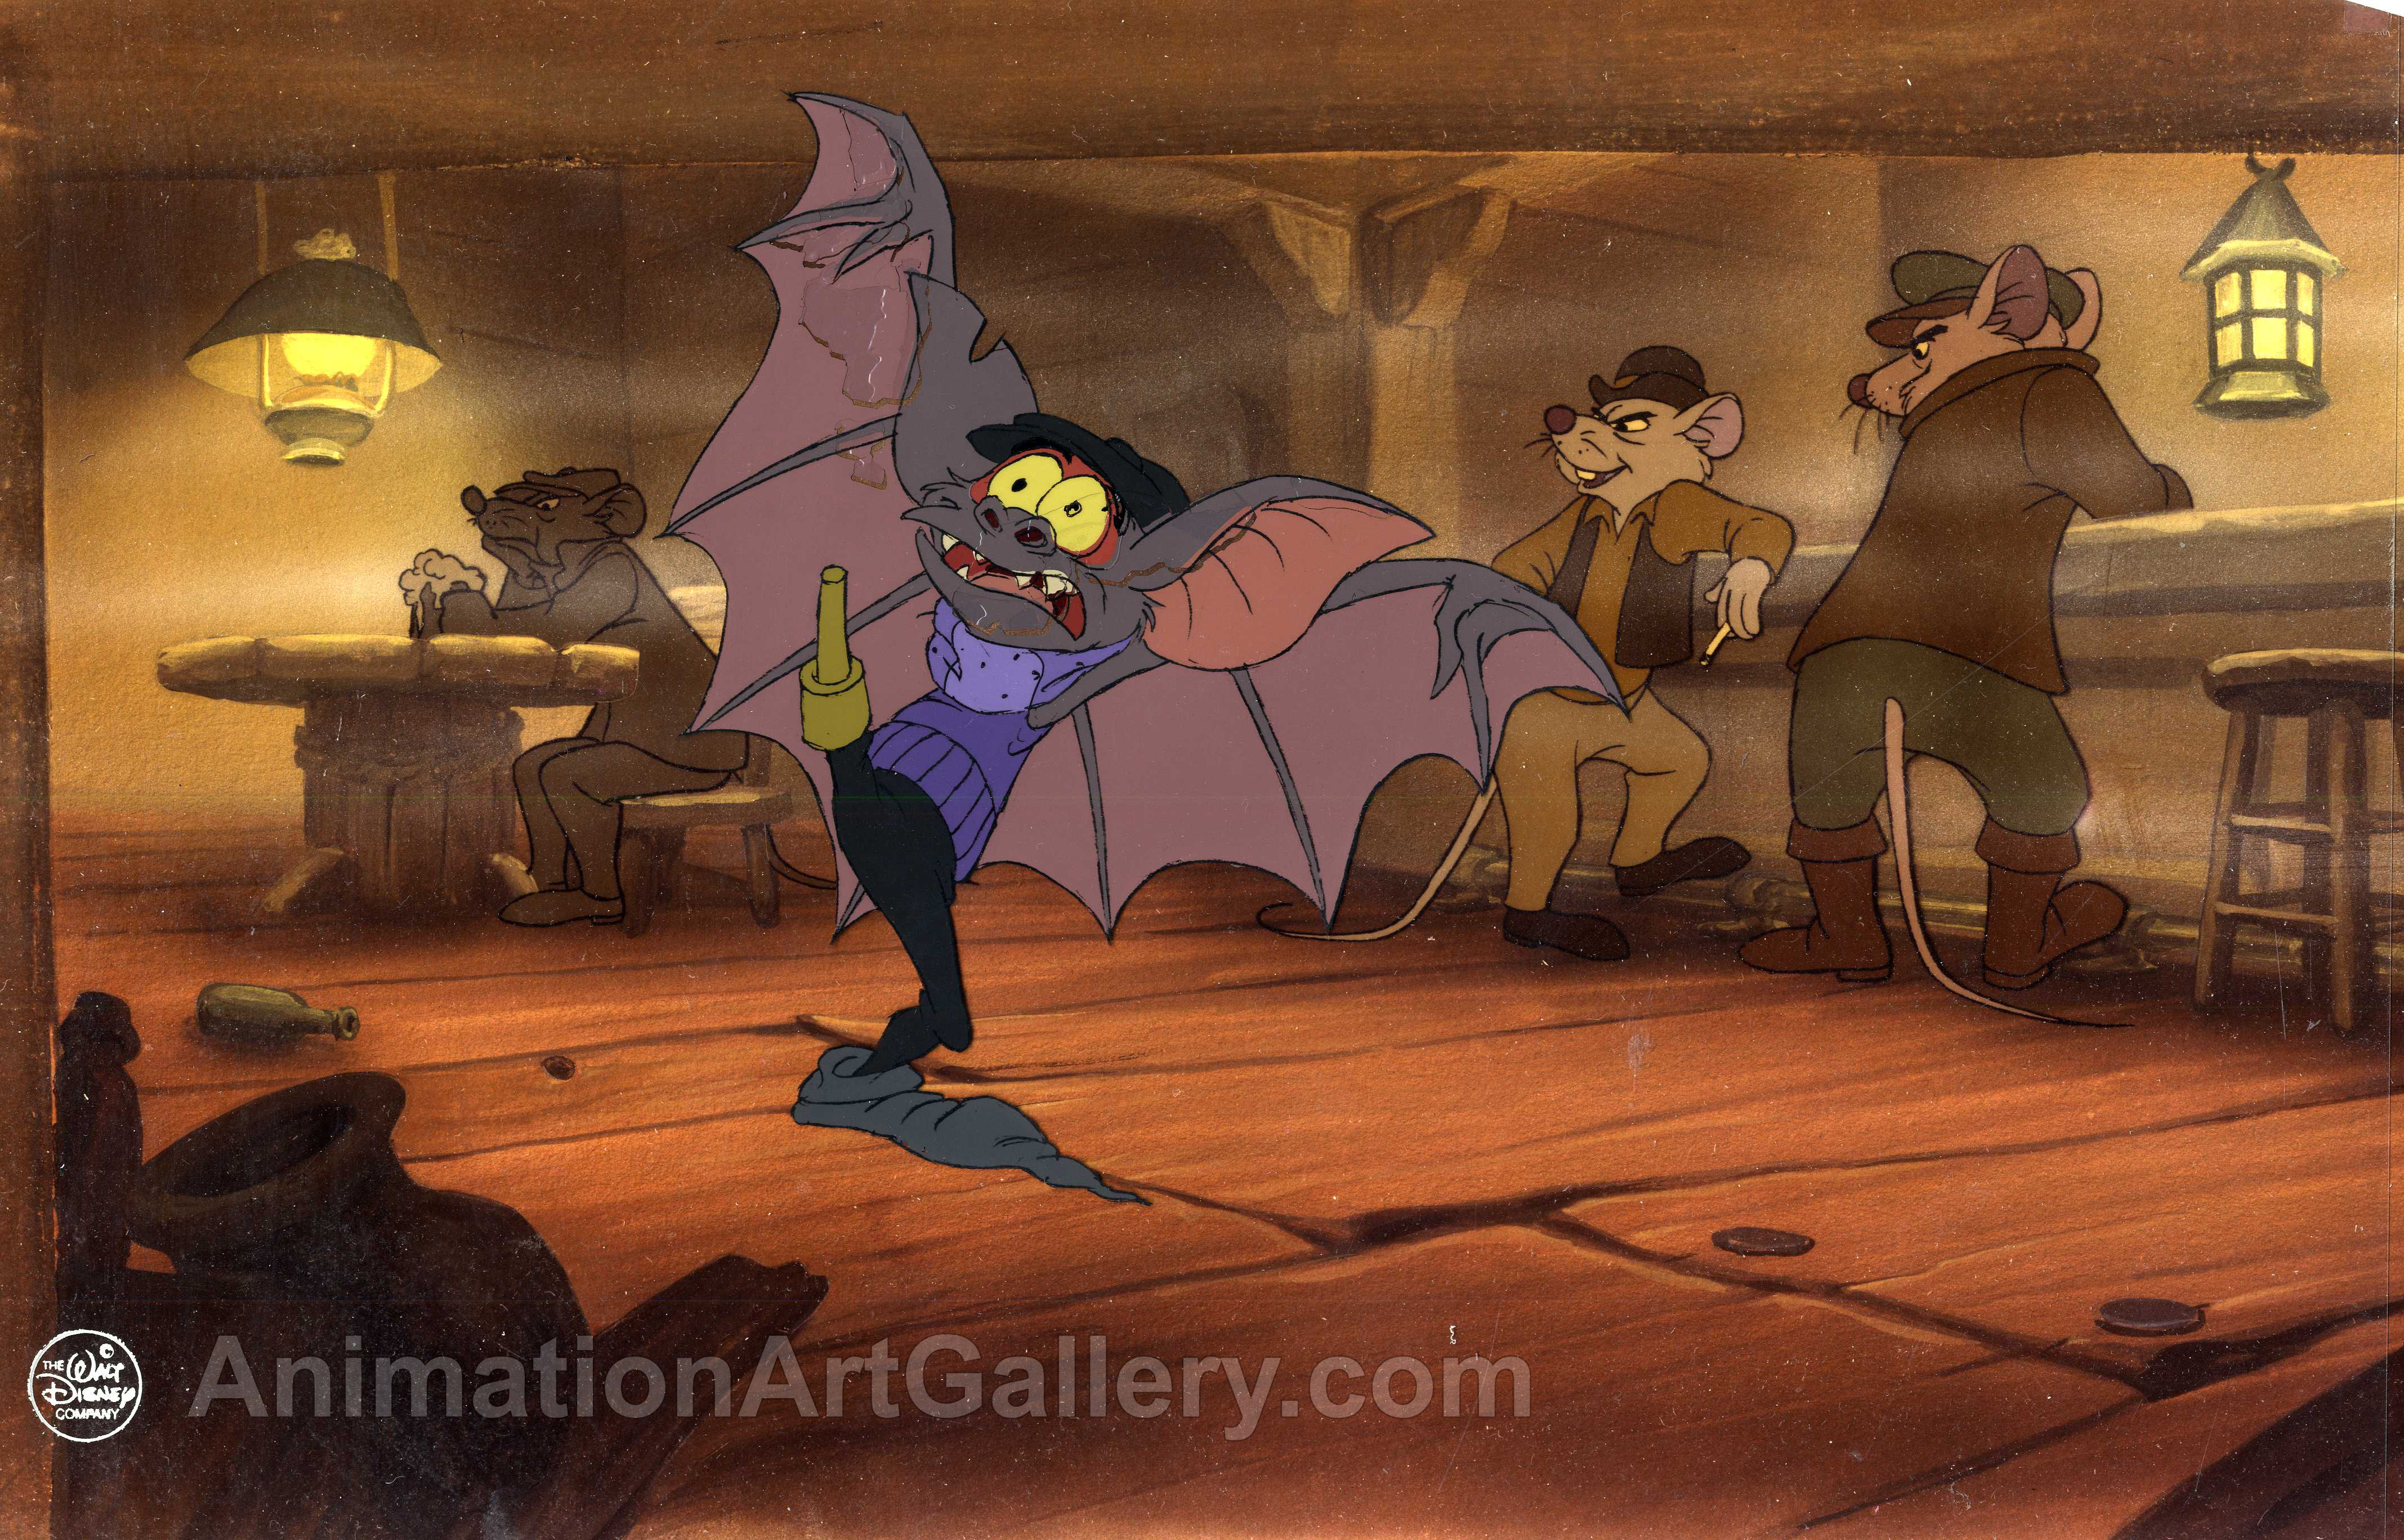 Original Production Cel of Fidget from The Great Mouse Detective